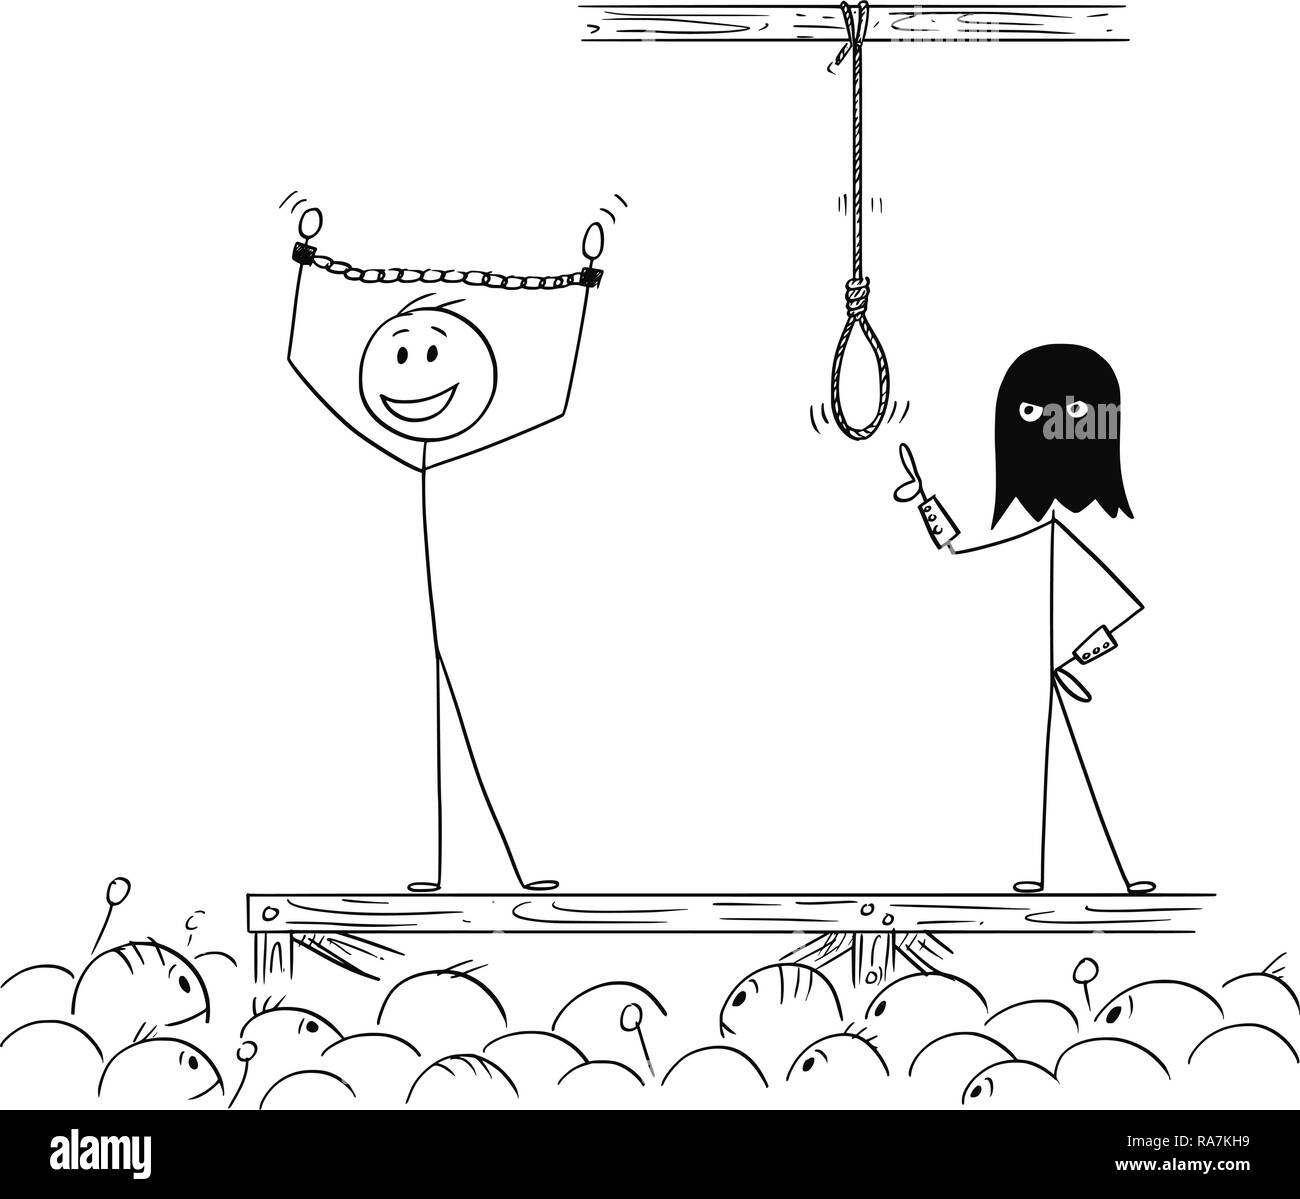 Cartoon of Man Enjoying the Crowd While Waiting On His Own Execution Stock Vector